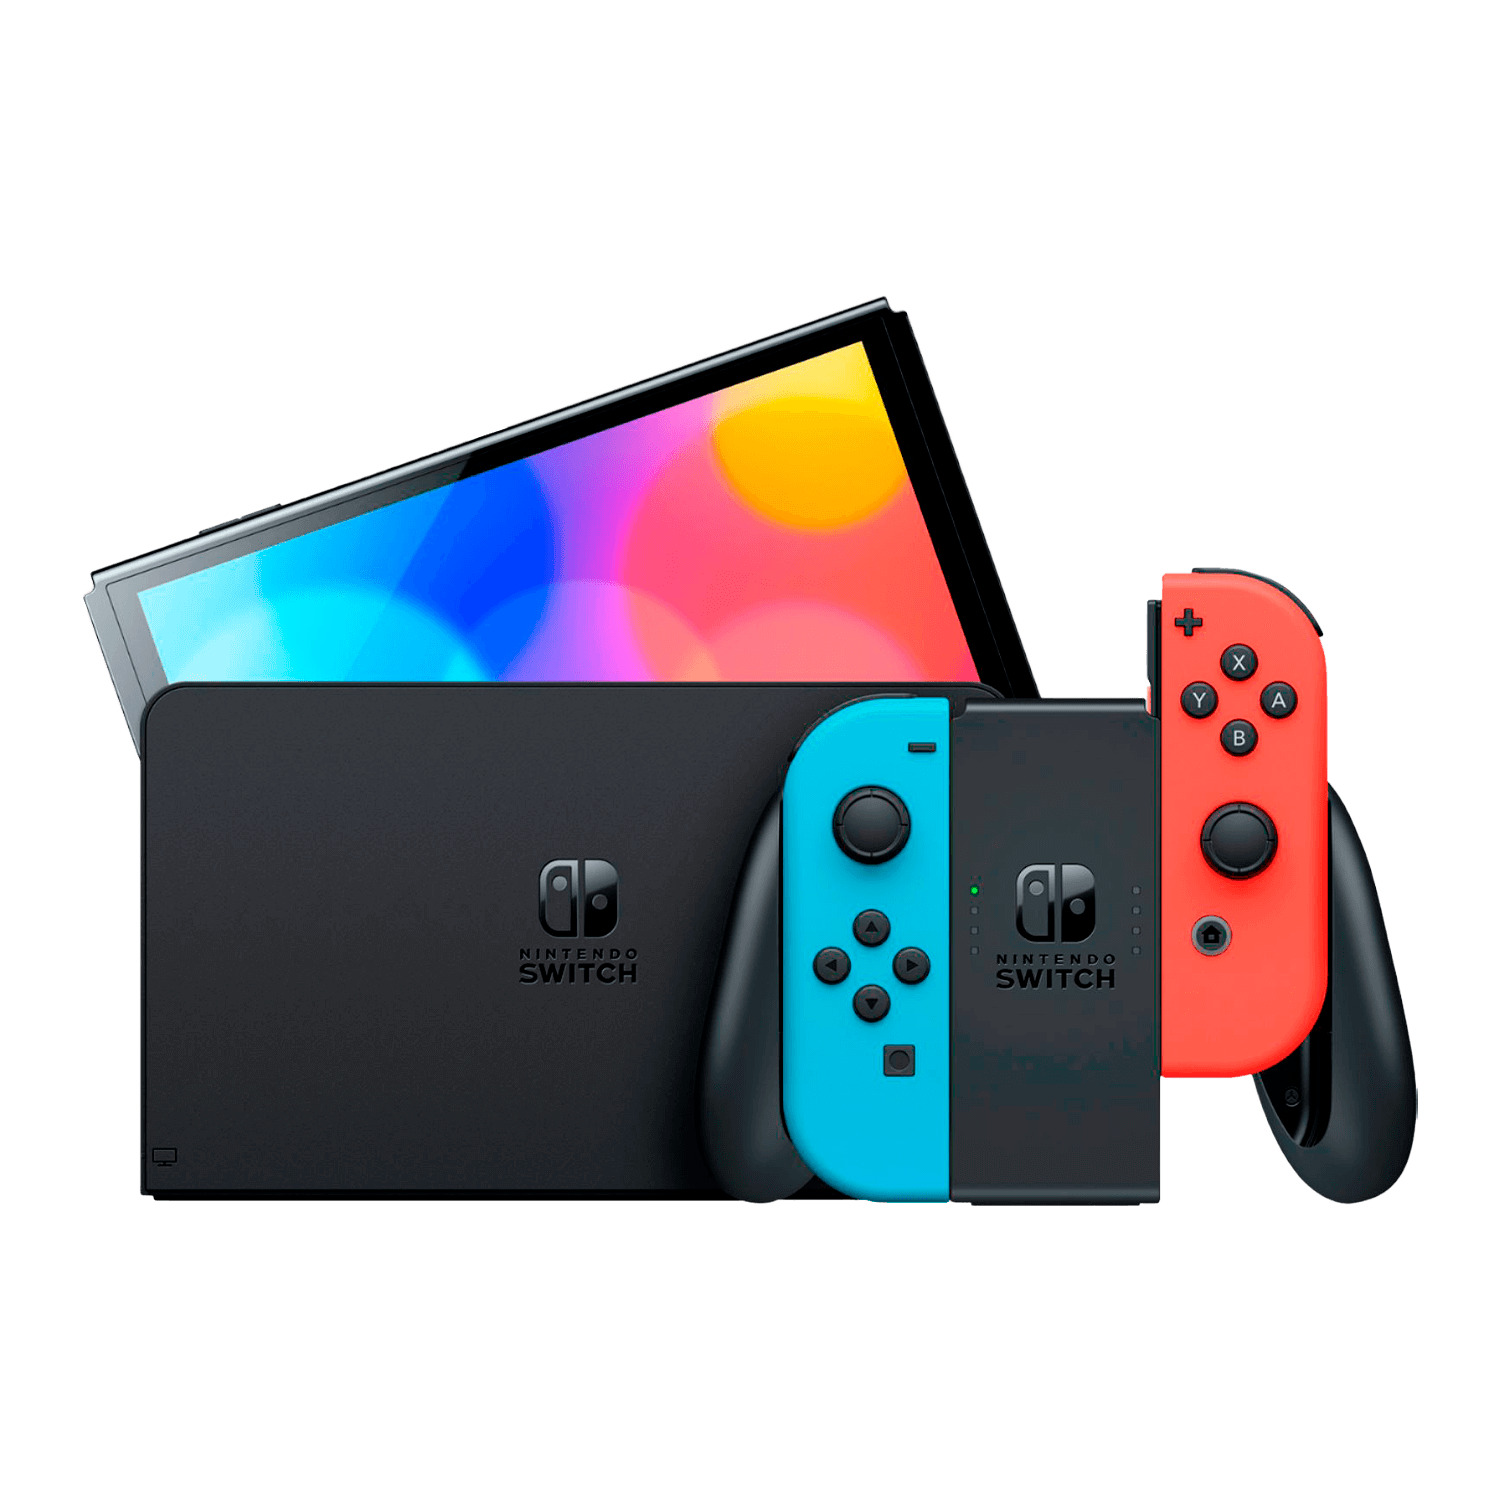 Console Nintendo Switch OLED 64GB Japão - Neon (HAD-S-KGALG 